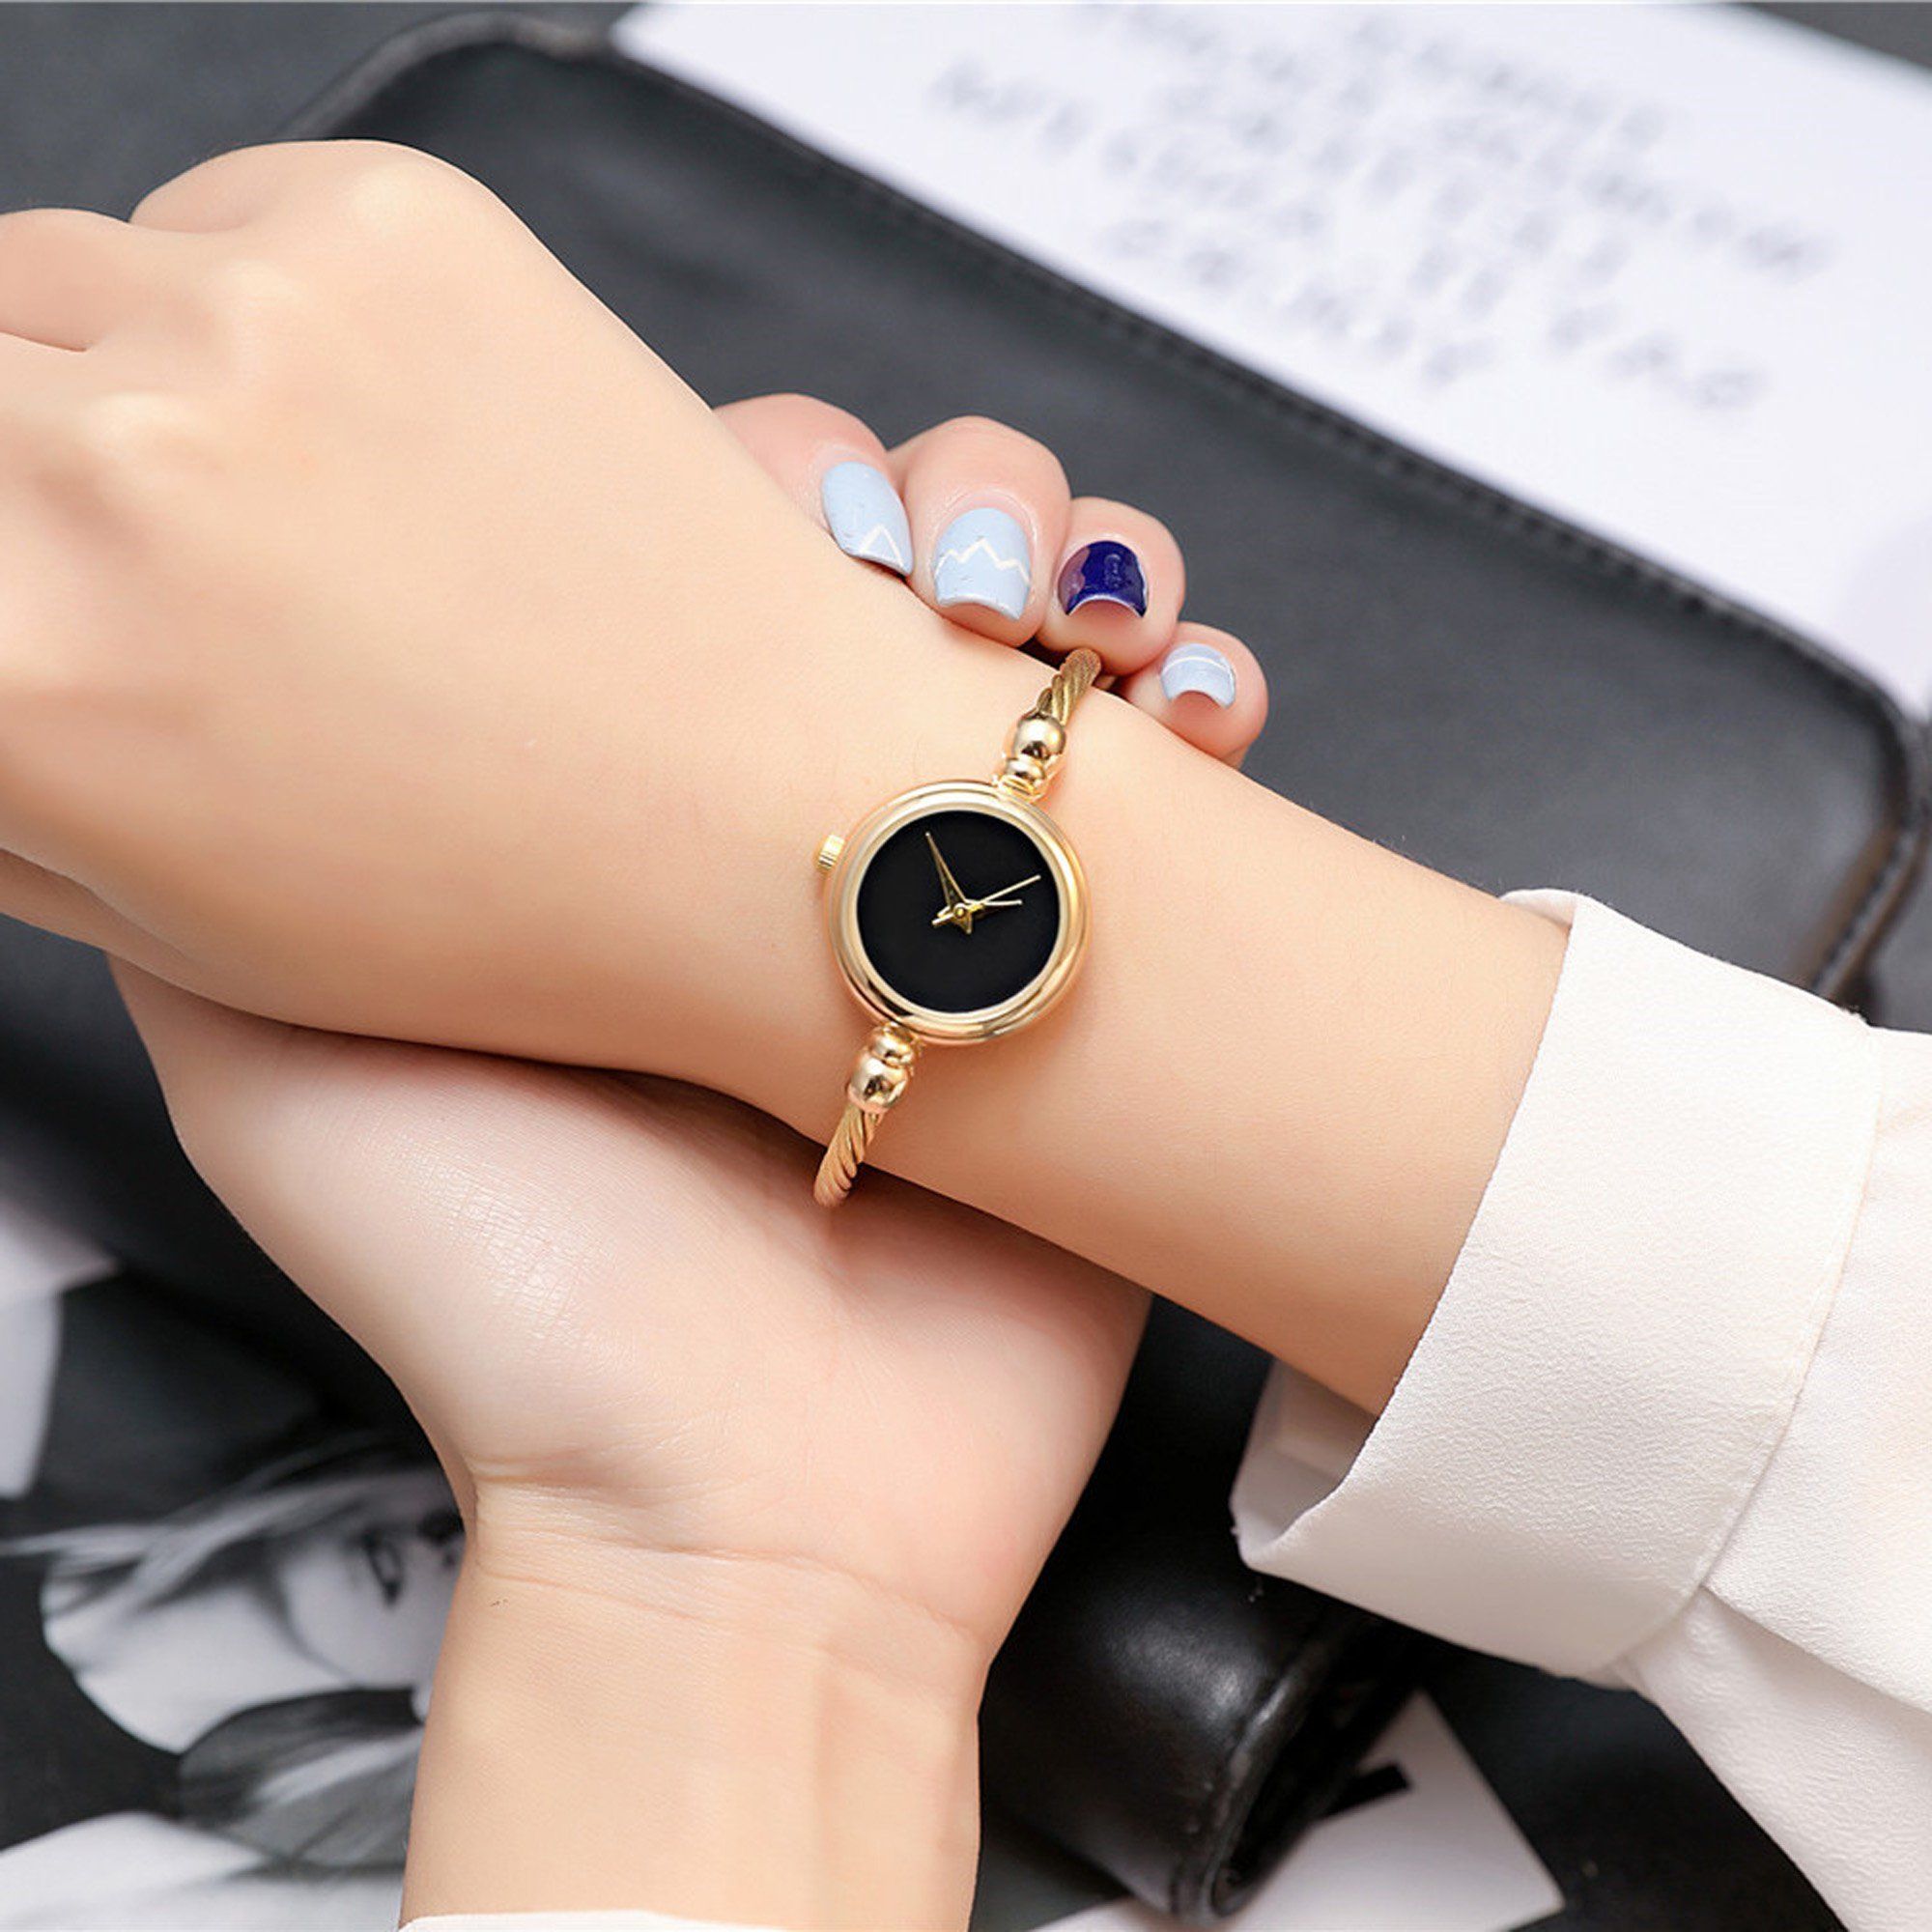 women’s watches features